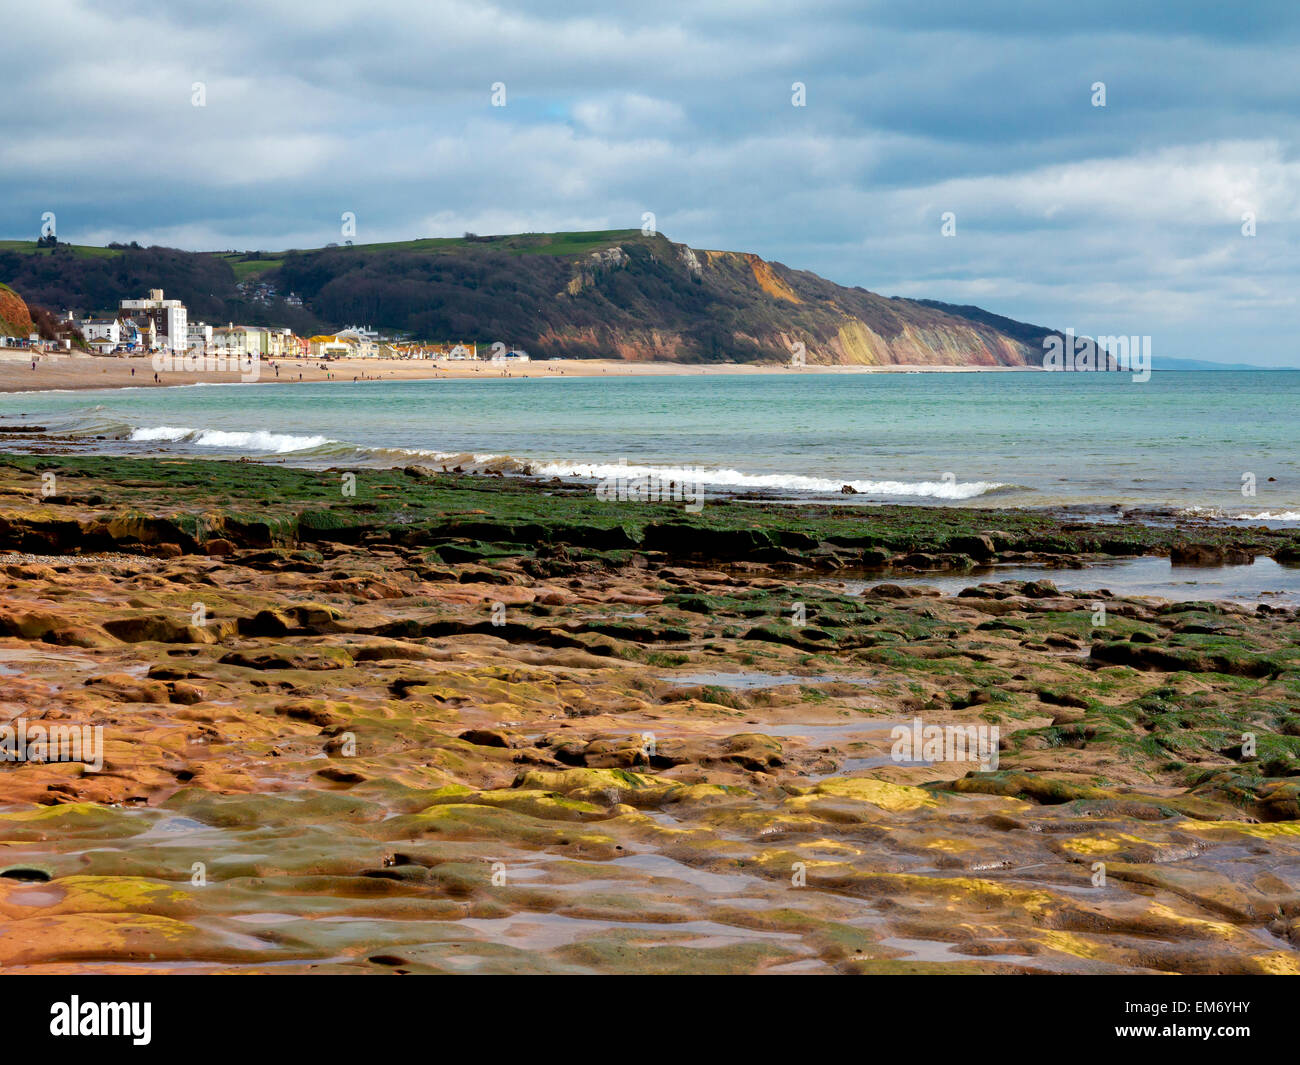 A view taken from a wave cut platform on the beach and looking east towards the holiday resort of Seaton Devon England UK Stock Photo